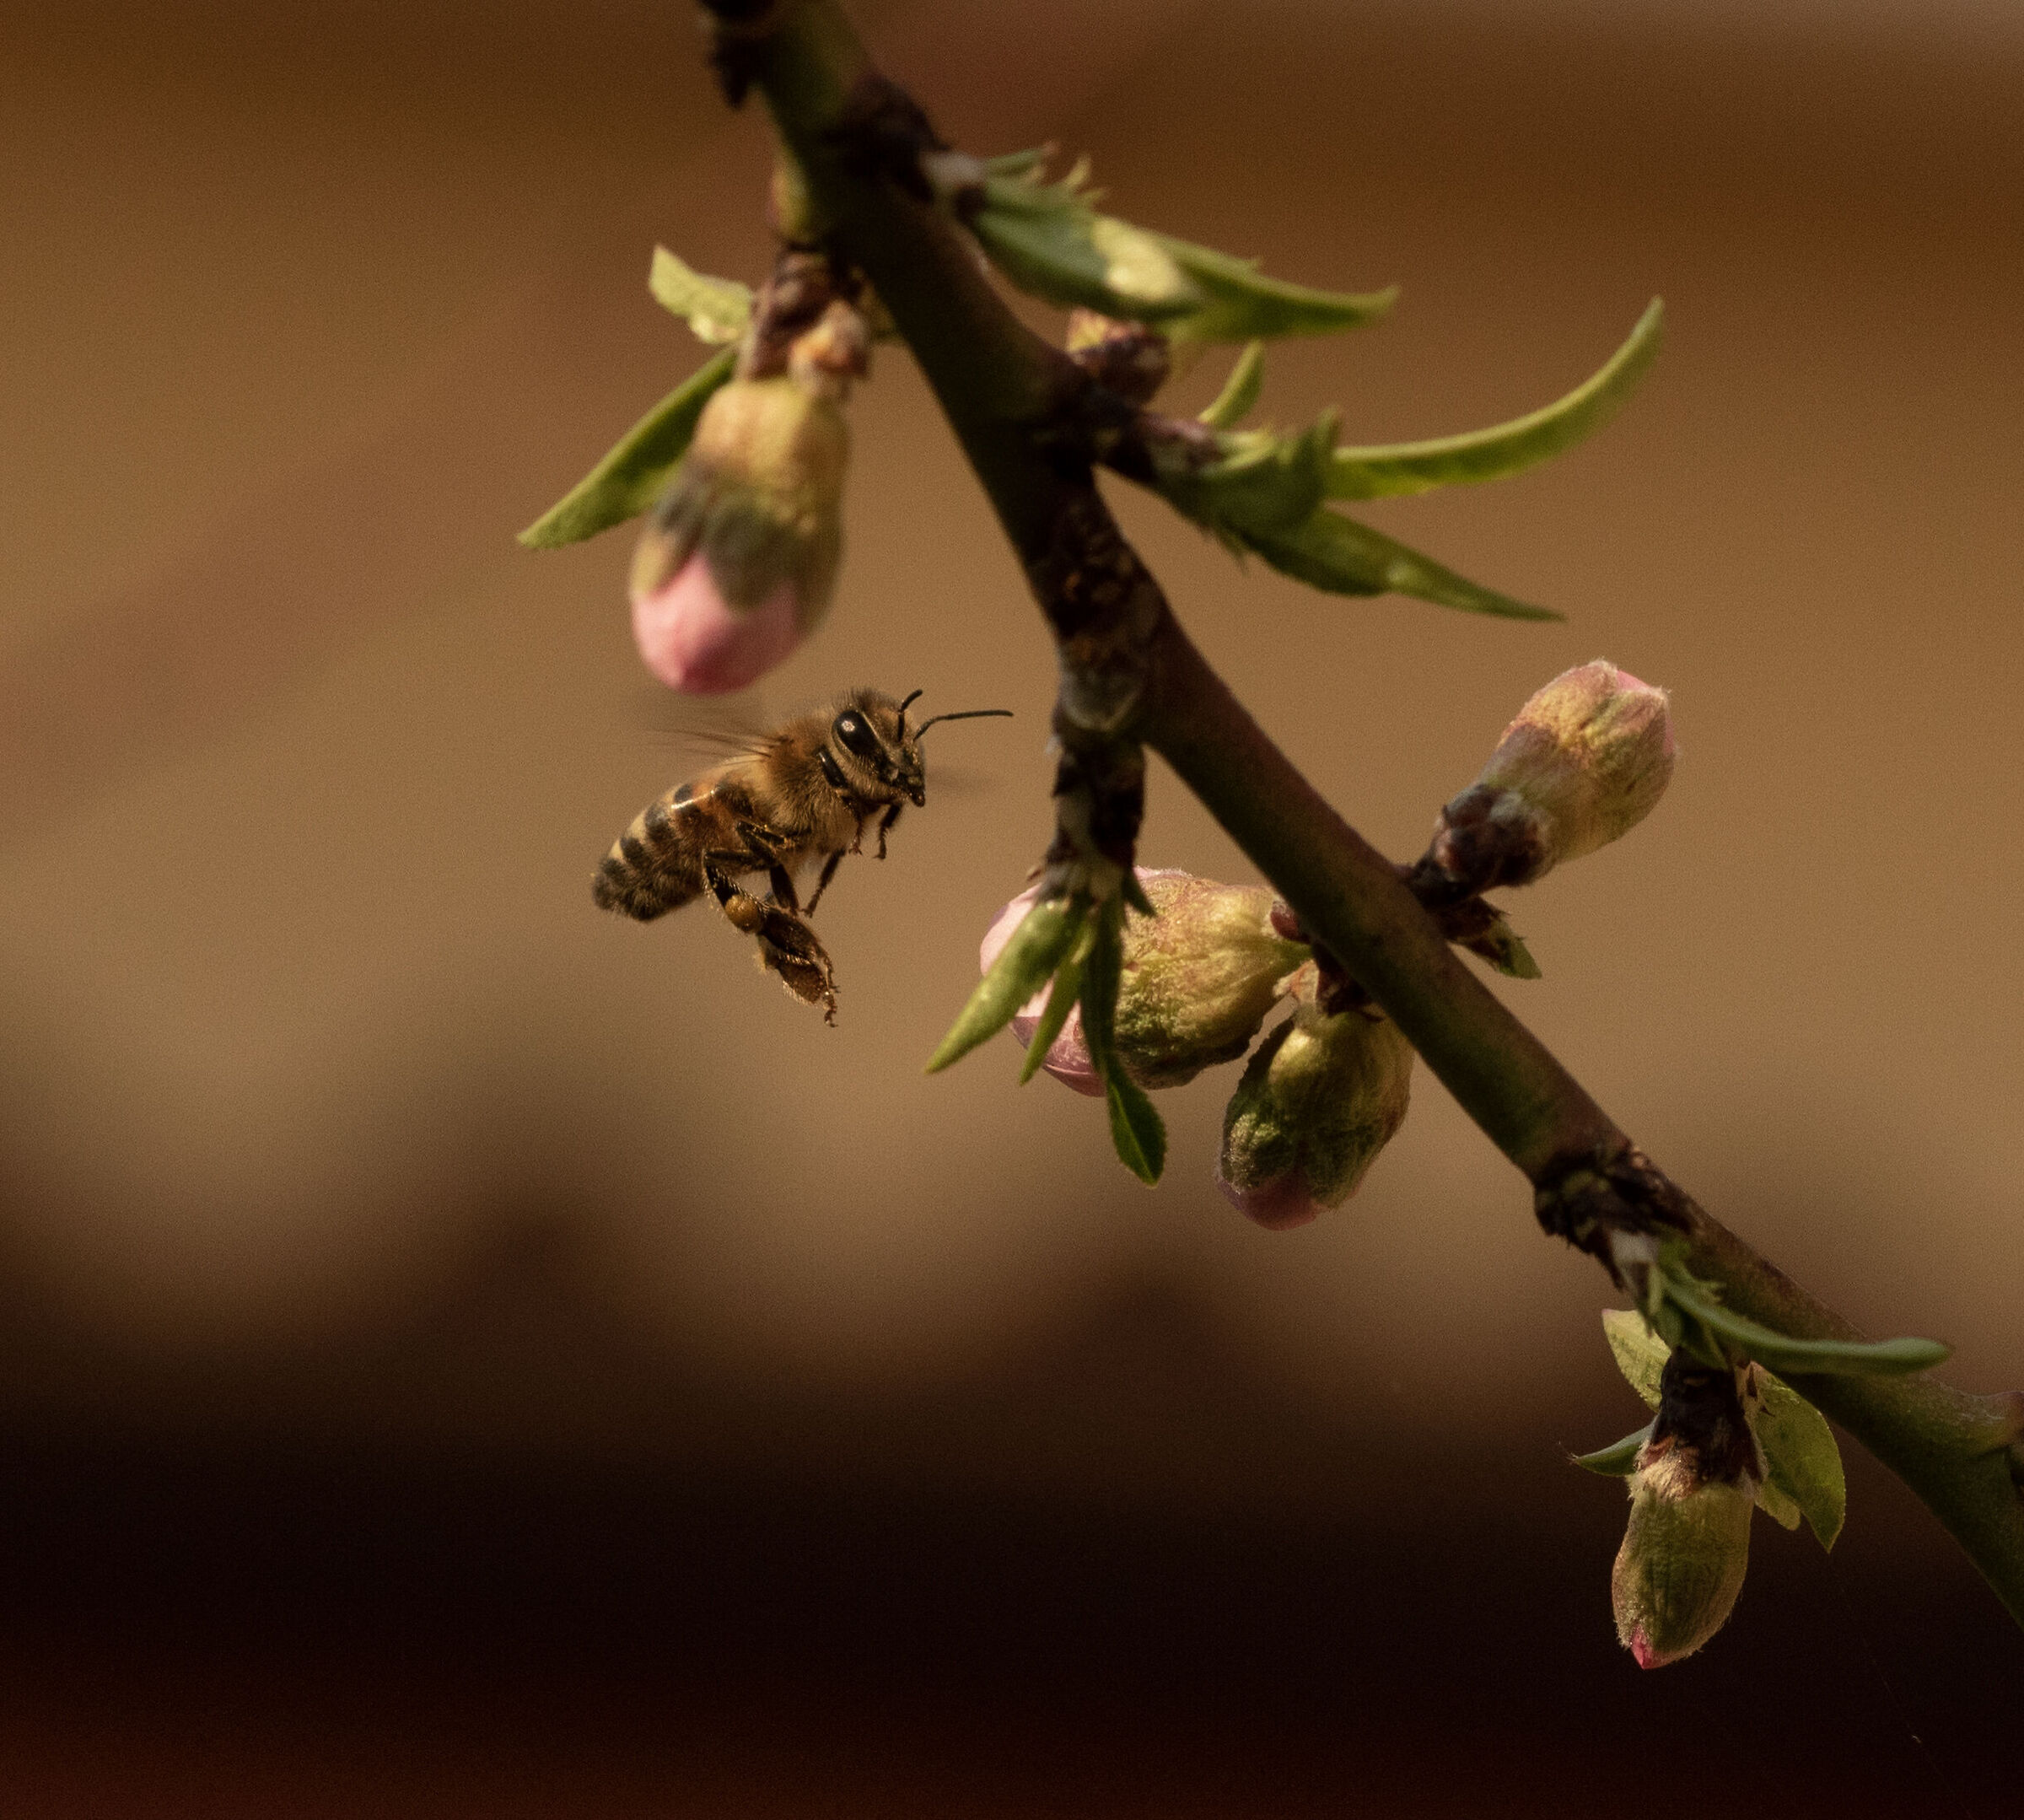 Bee flying among peach blossoms 20/03/2023...